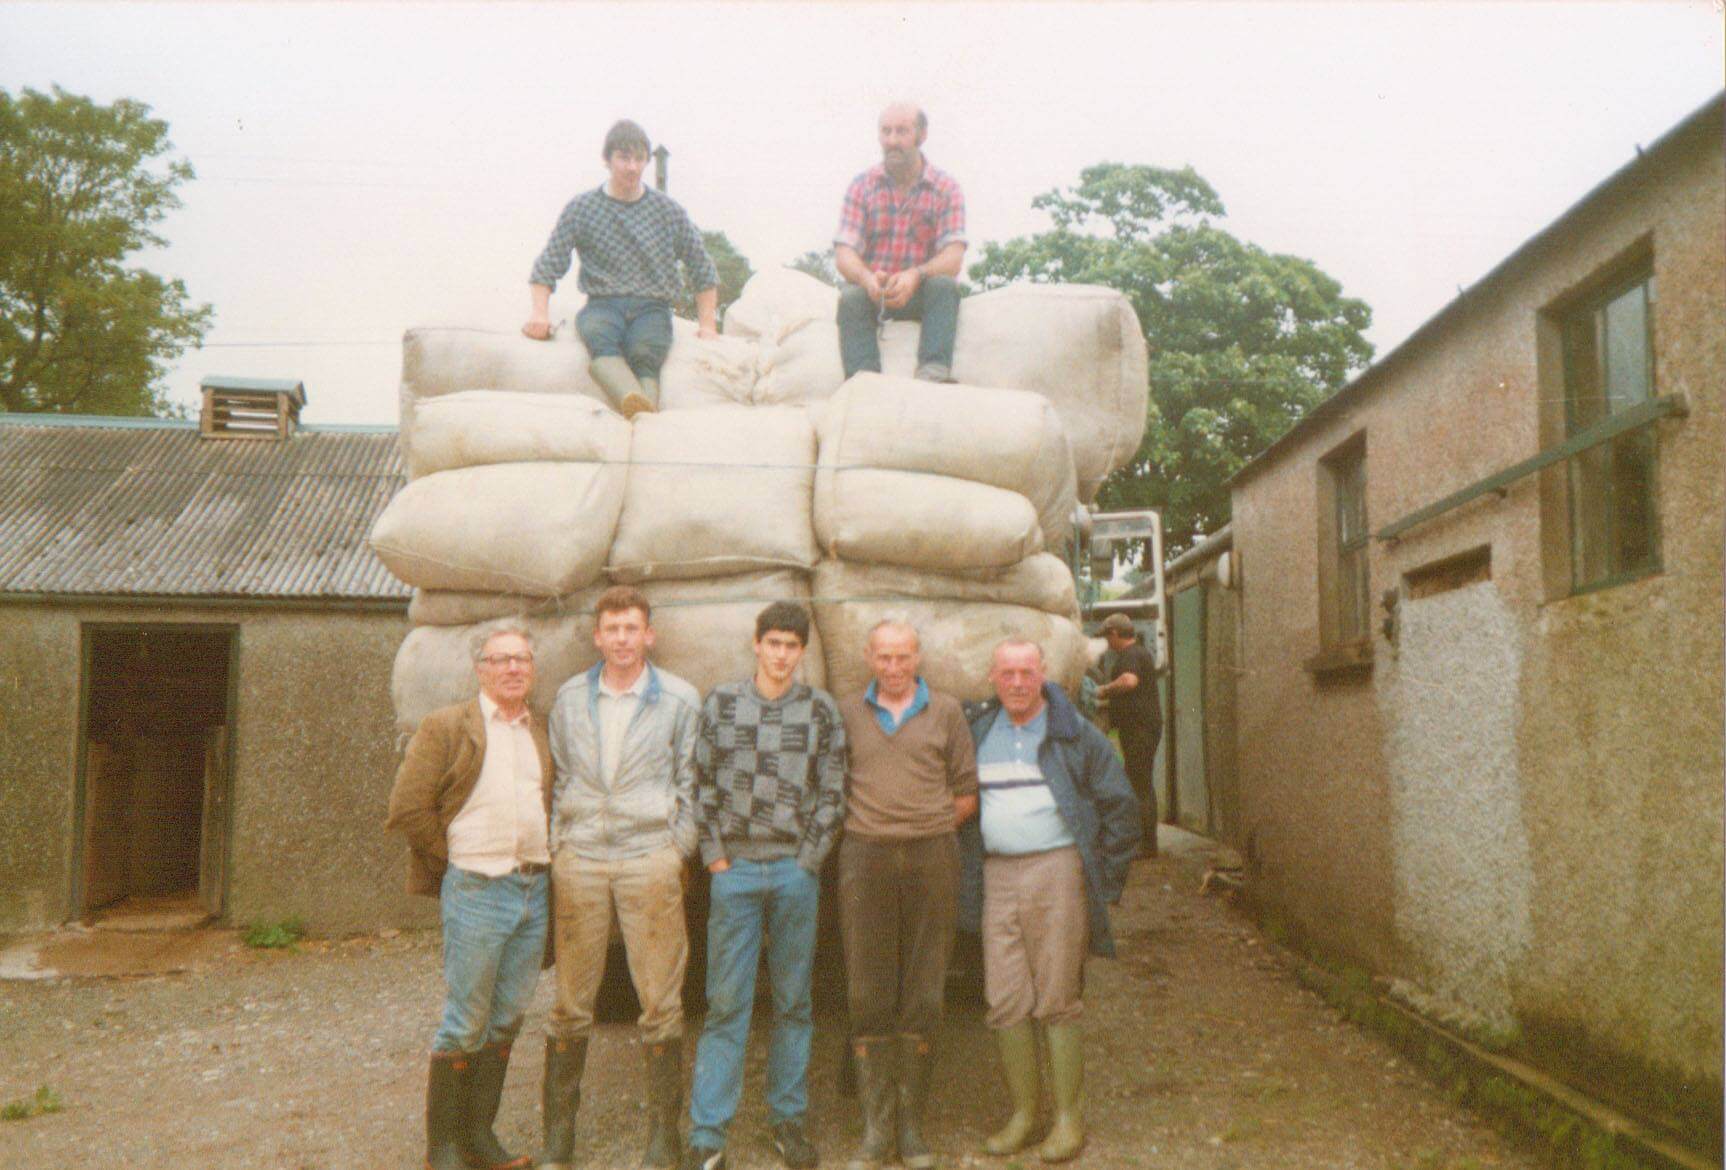 Wool bales collection, 1980's Duncarbit